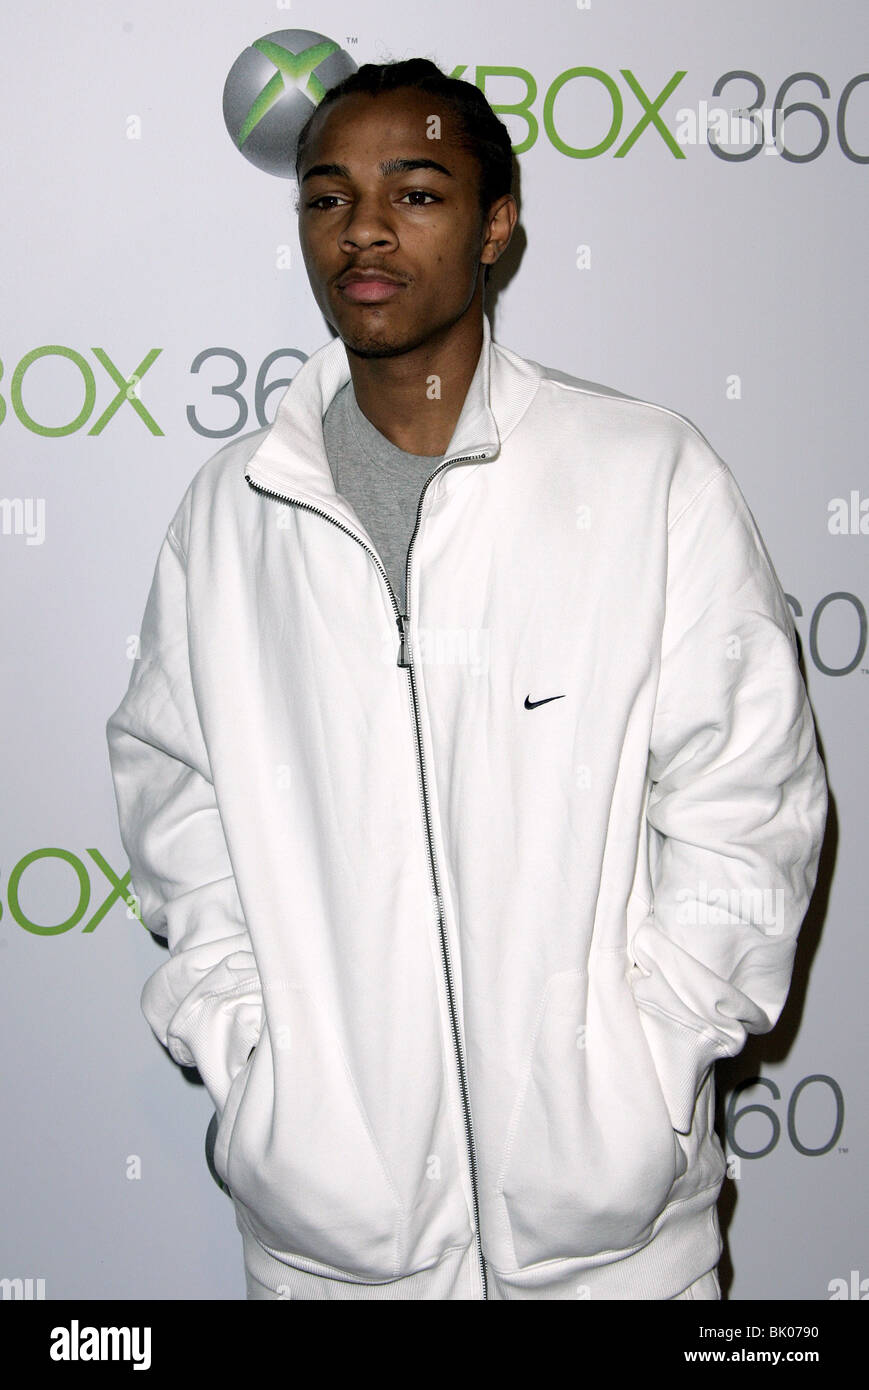 BOW WOW XBOX 360 LAUNCH PARTY PRIVATE HOME HOLLYWOOD HILLS LOS ANGELES USA  16 November 2005 Stock Photo - Alamy